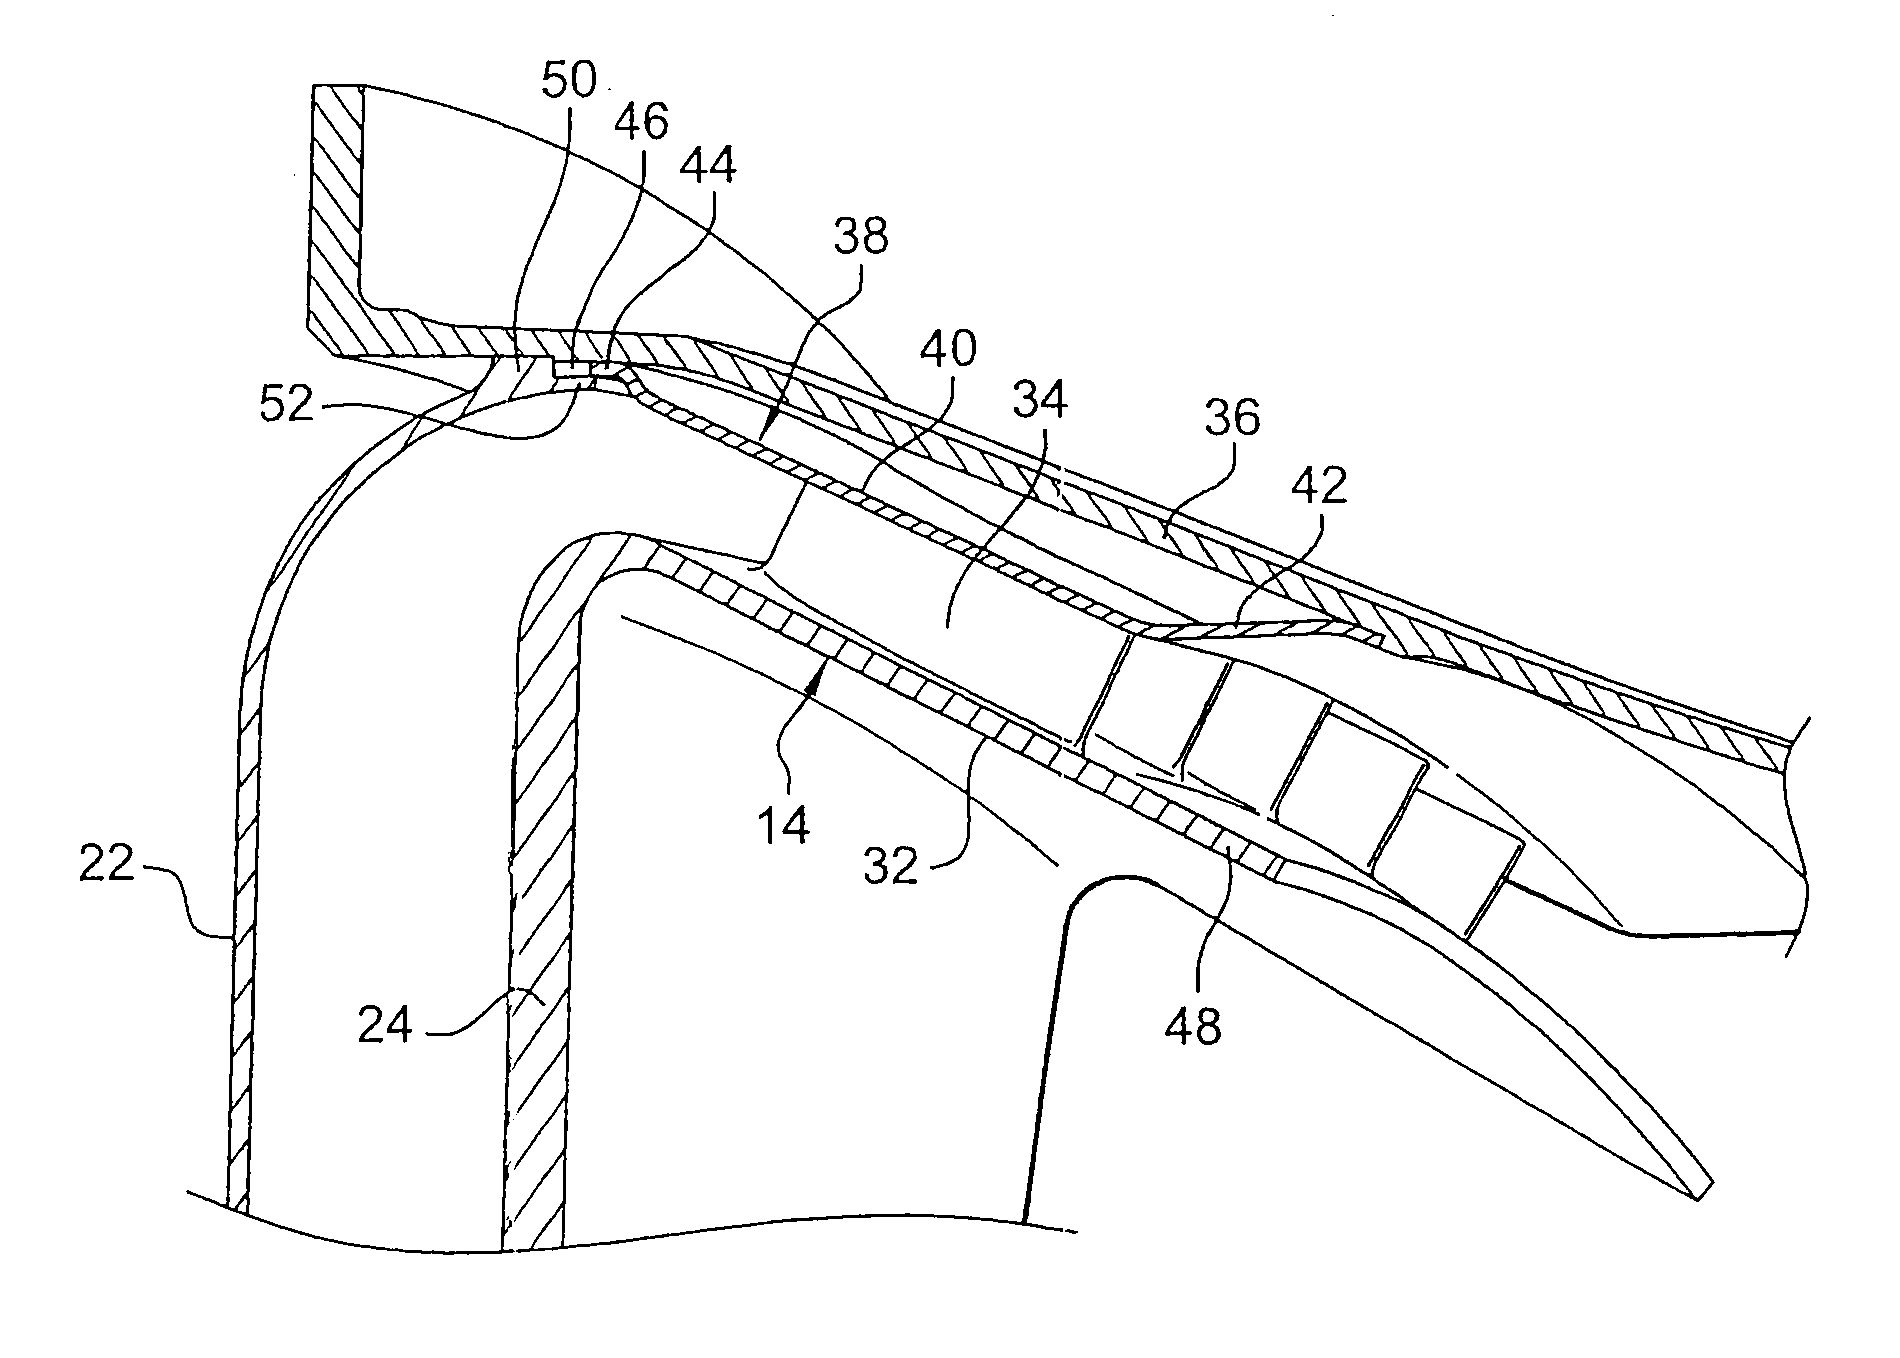 Diffuser-nozzle assembly for a turbomachine